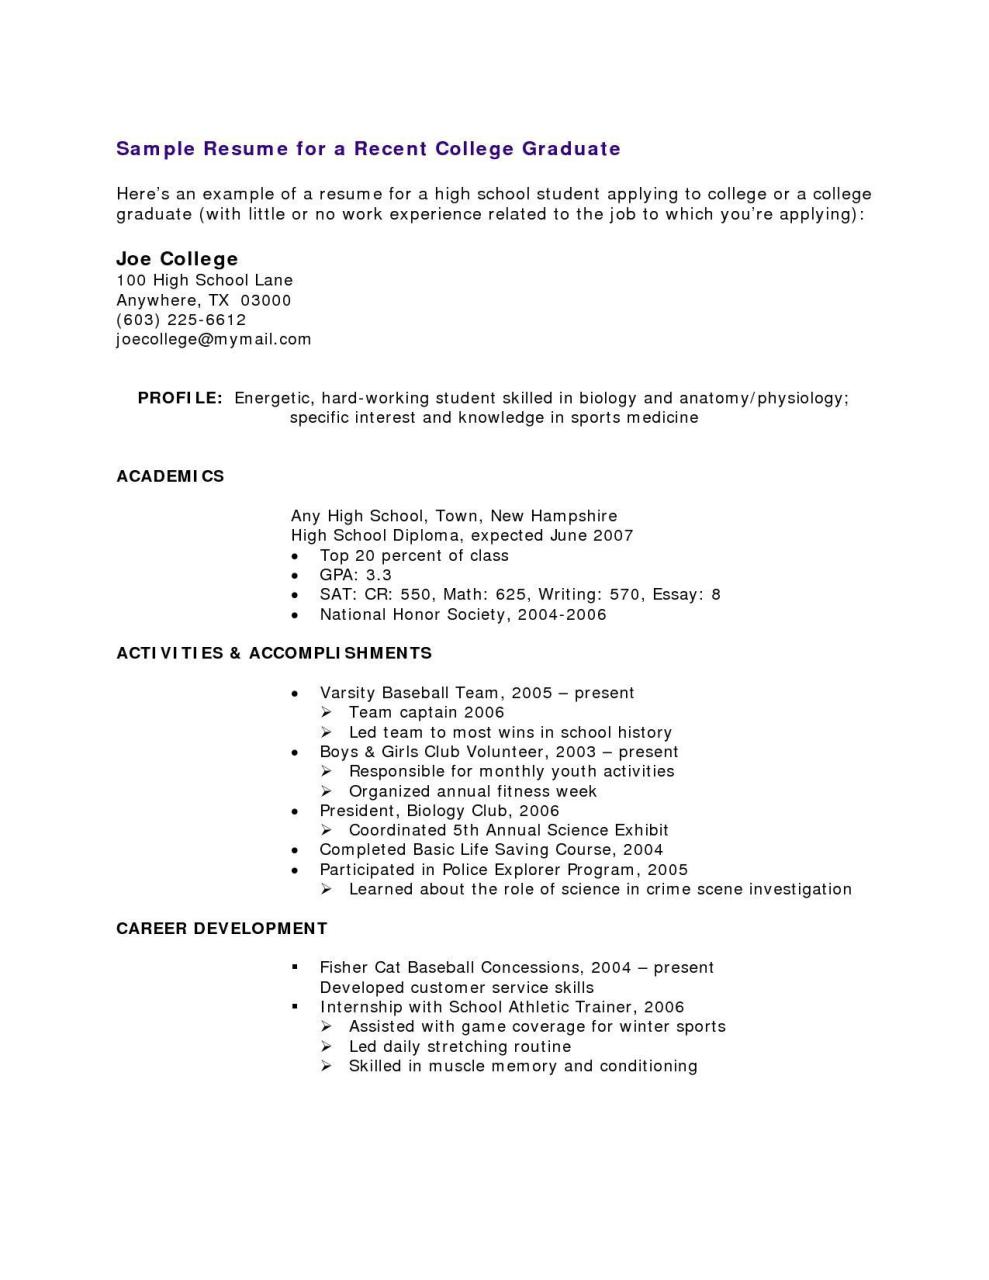 Example Of Resume To Apply Job Without Experience